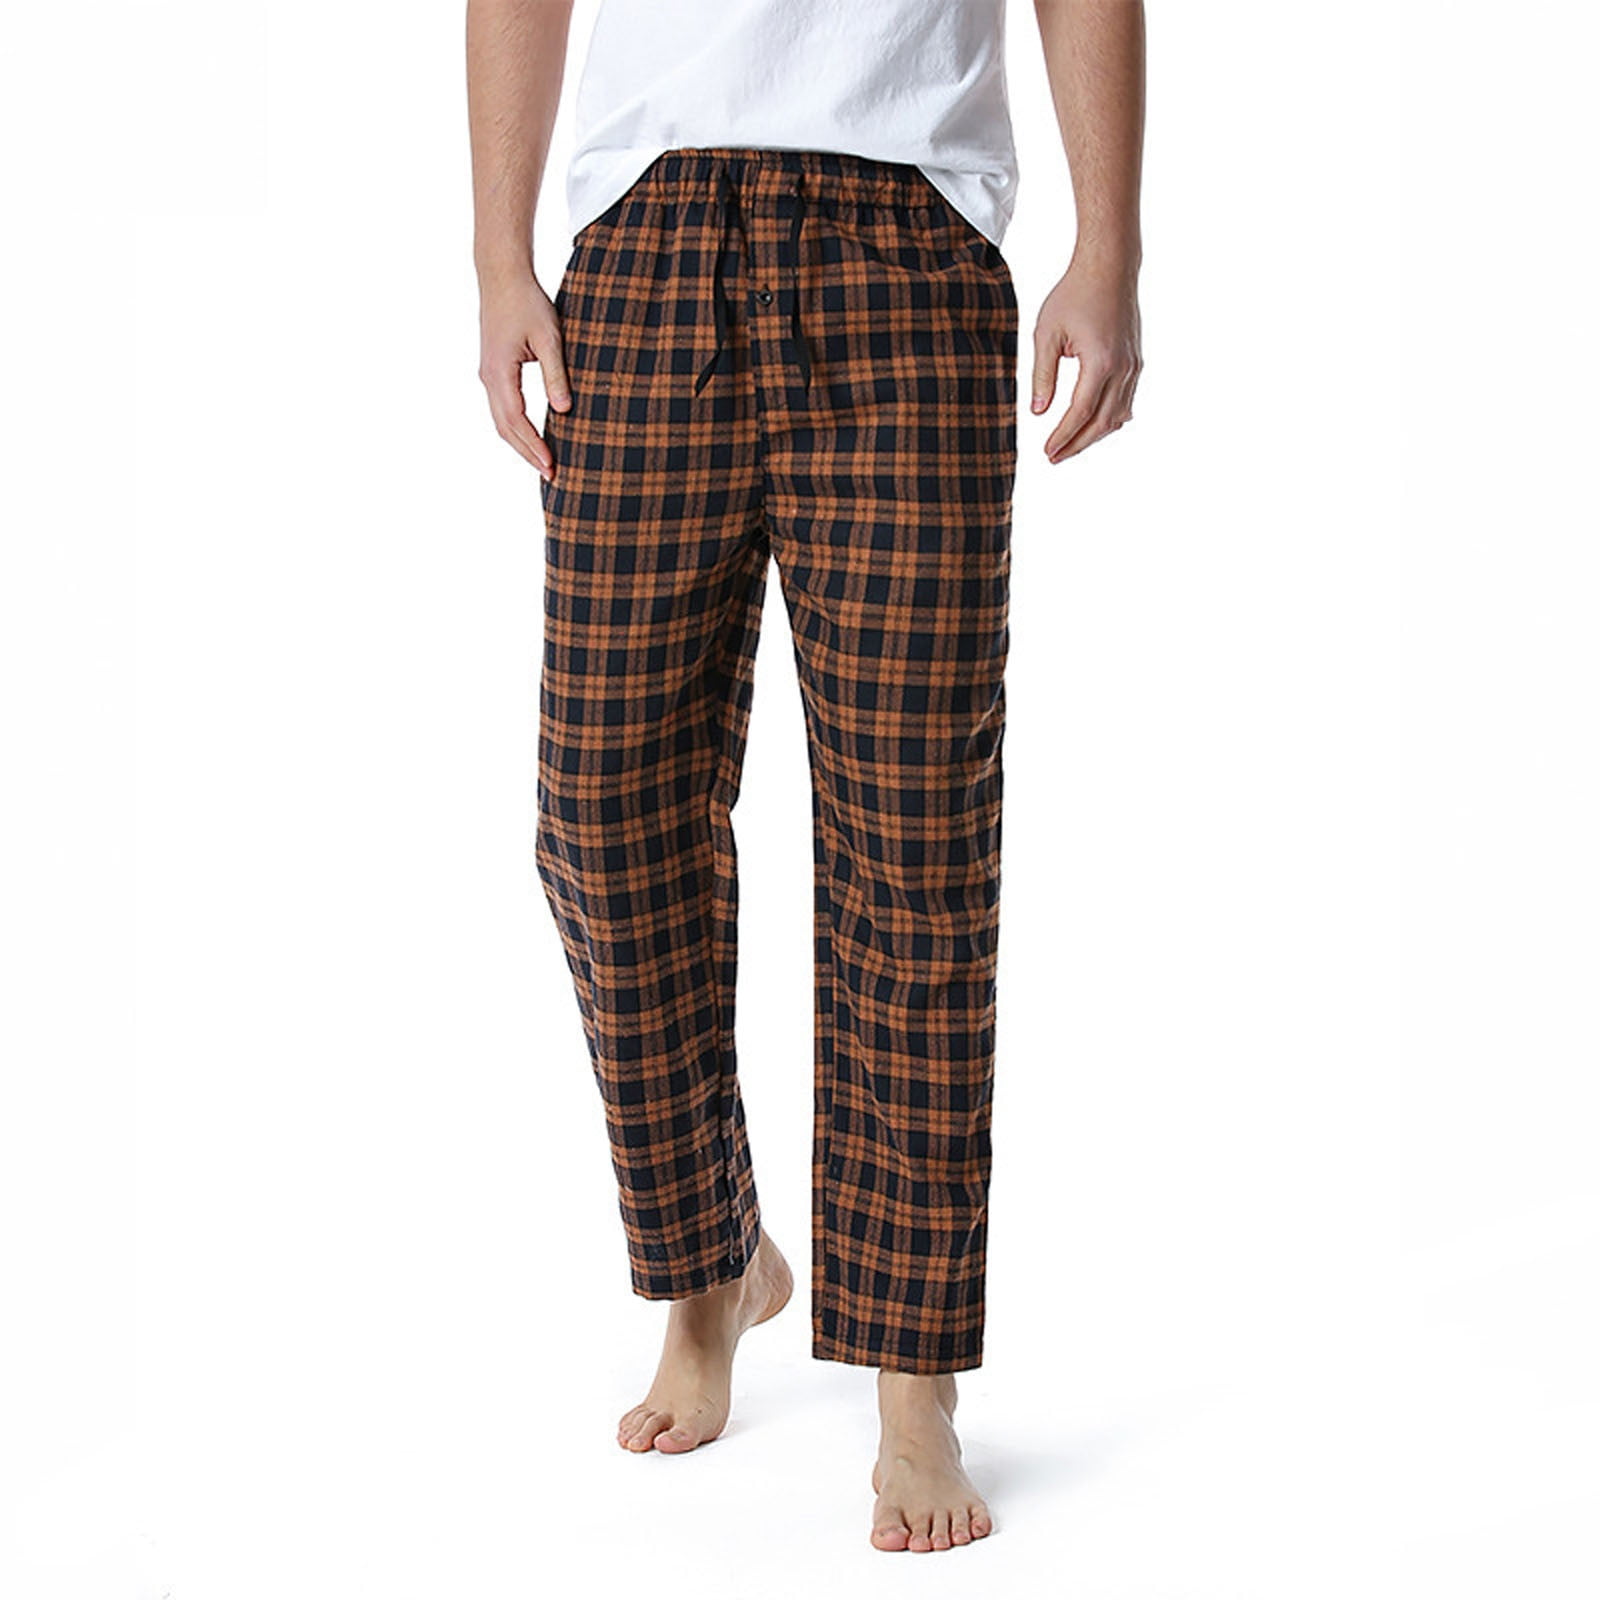 Night Wear Cotton Pajama Track Pant at Rs.145/Piece in erode offer by M M  Trading Company